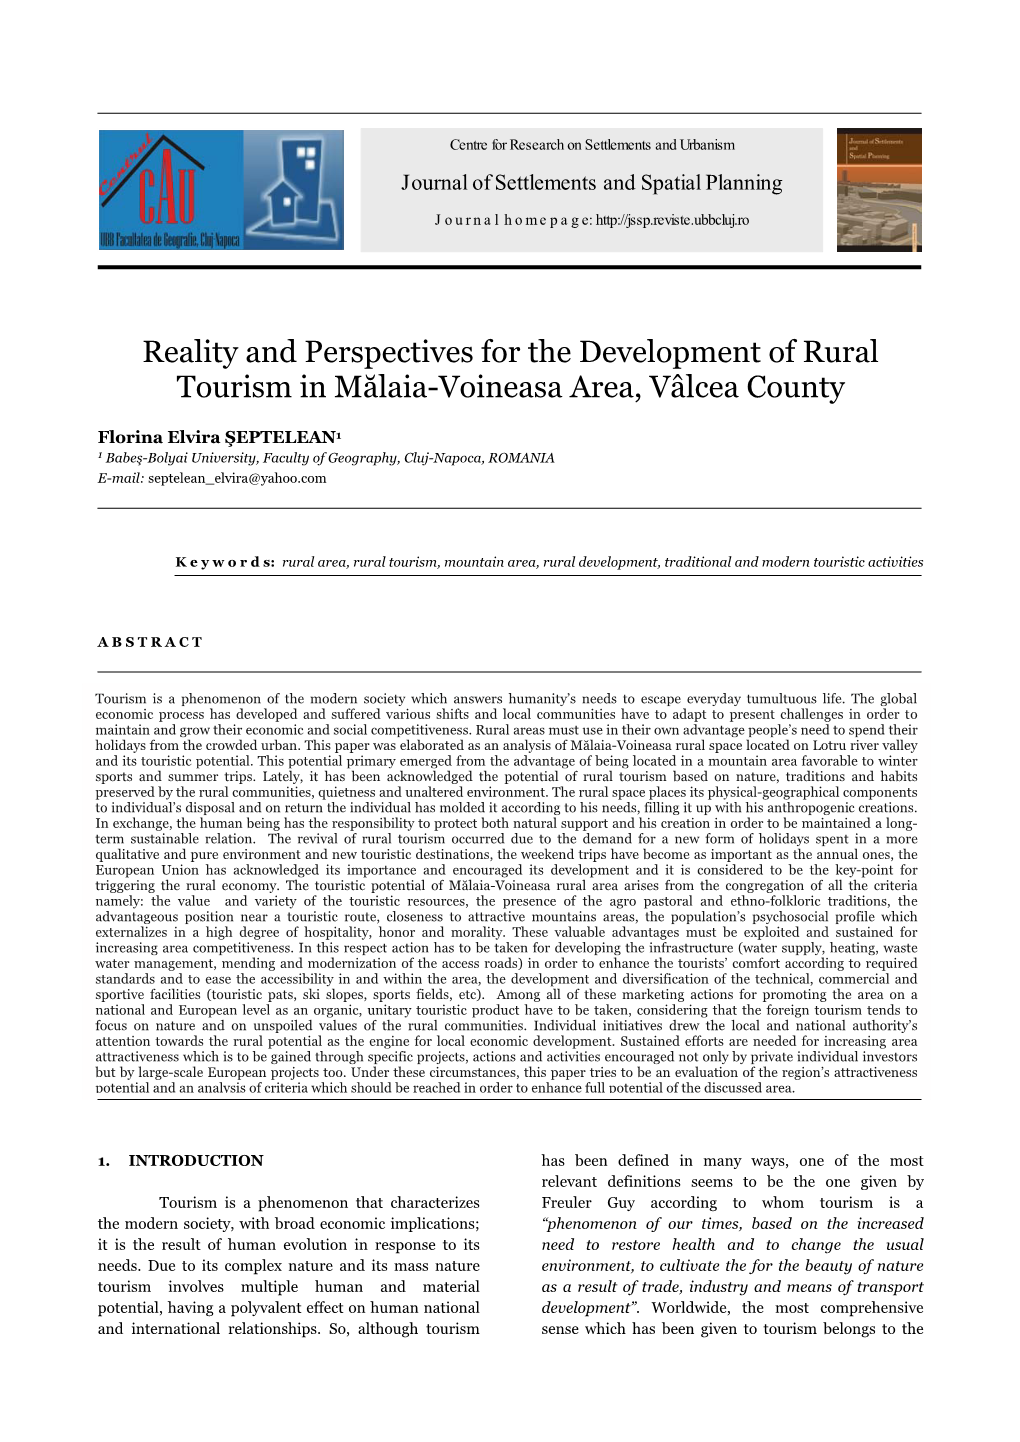 Reality and Perspectives for the Development of Rural Tourism in Mălaia-Voineasa Area, Vâlcea County